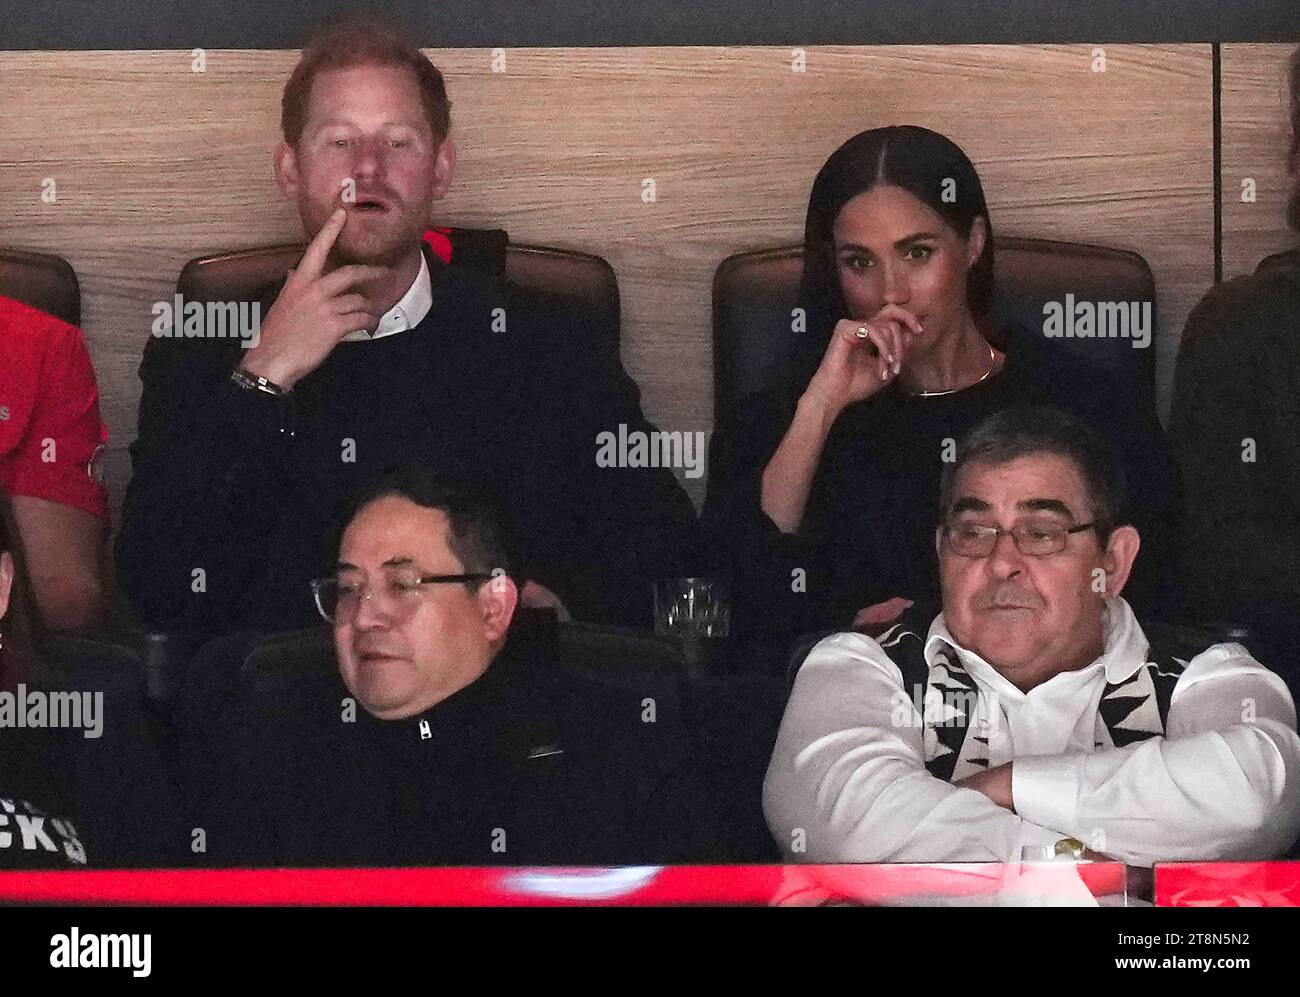 Prince Harry, top left, and Meghan Markle, top right, The Duke and Duchess of Sussex, watch the Vancouver Canucks and the San Jose Sharks play during the first period of an NHL hockey game in Vancouver, British Columbia, Monday, Nov. 20, 2023. (Darryl Dyck/The Canadian Press via AP) Stock Photo